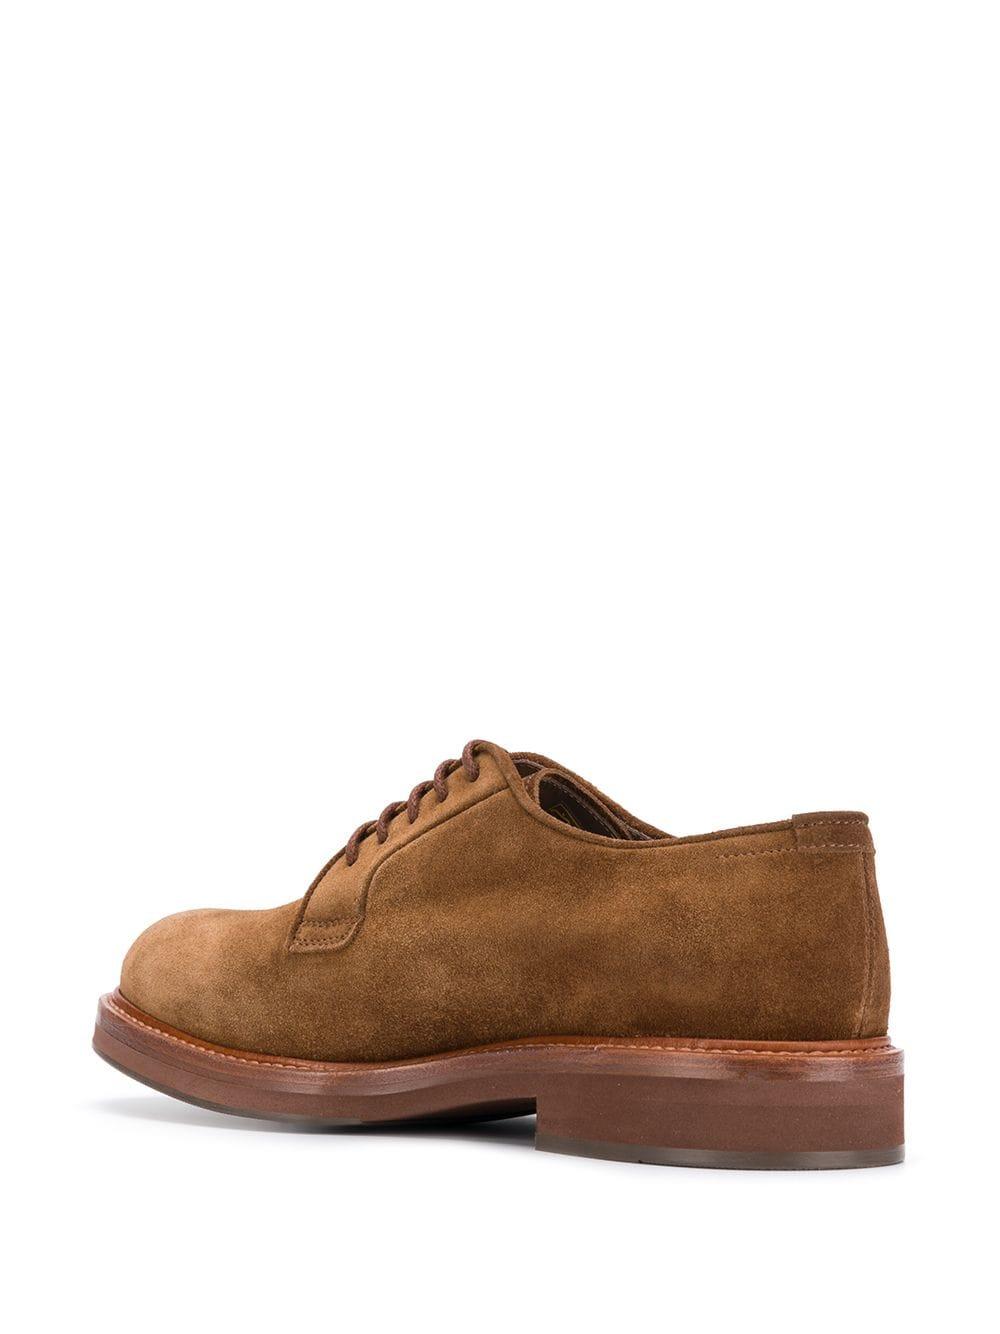 Brunello Cucinelli Lace-up Derby Shoes in Brown for Men - Lyst